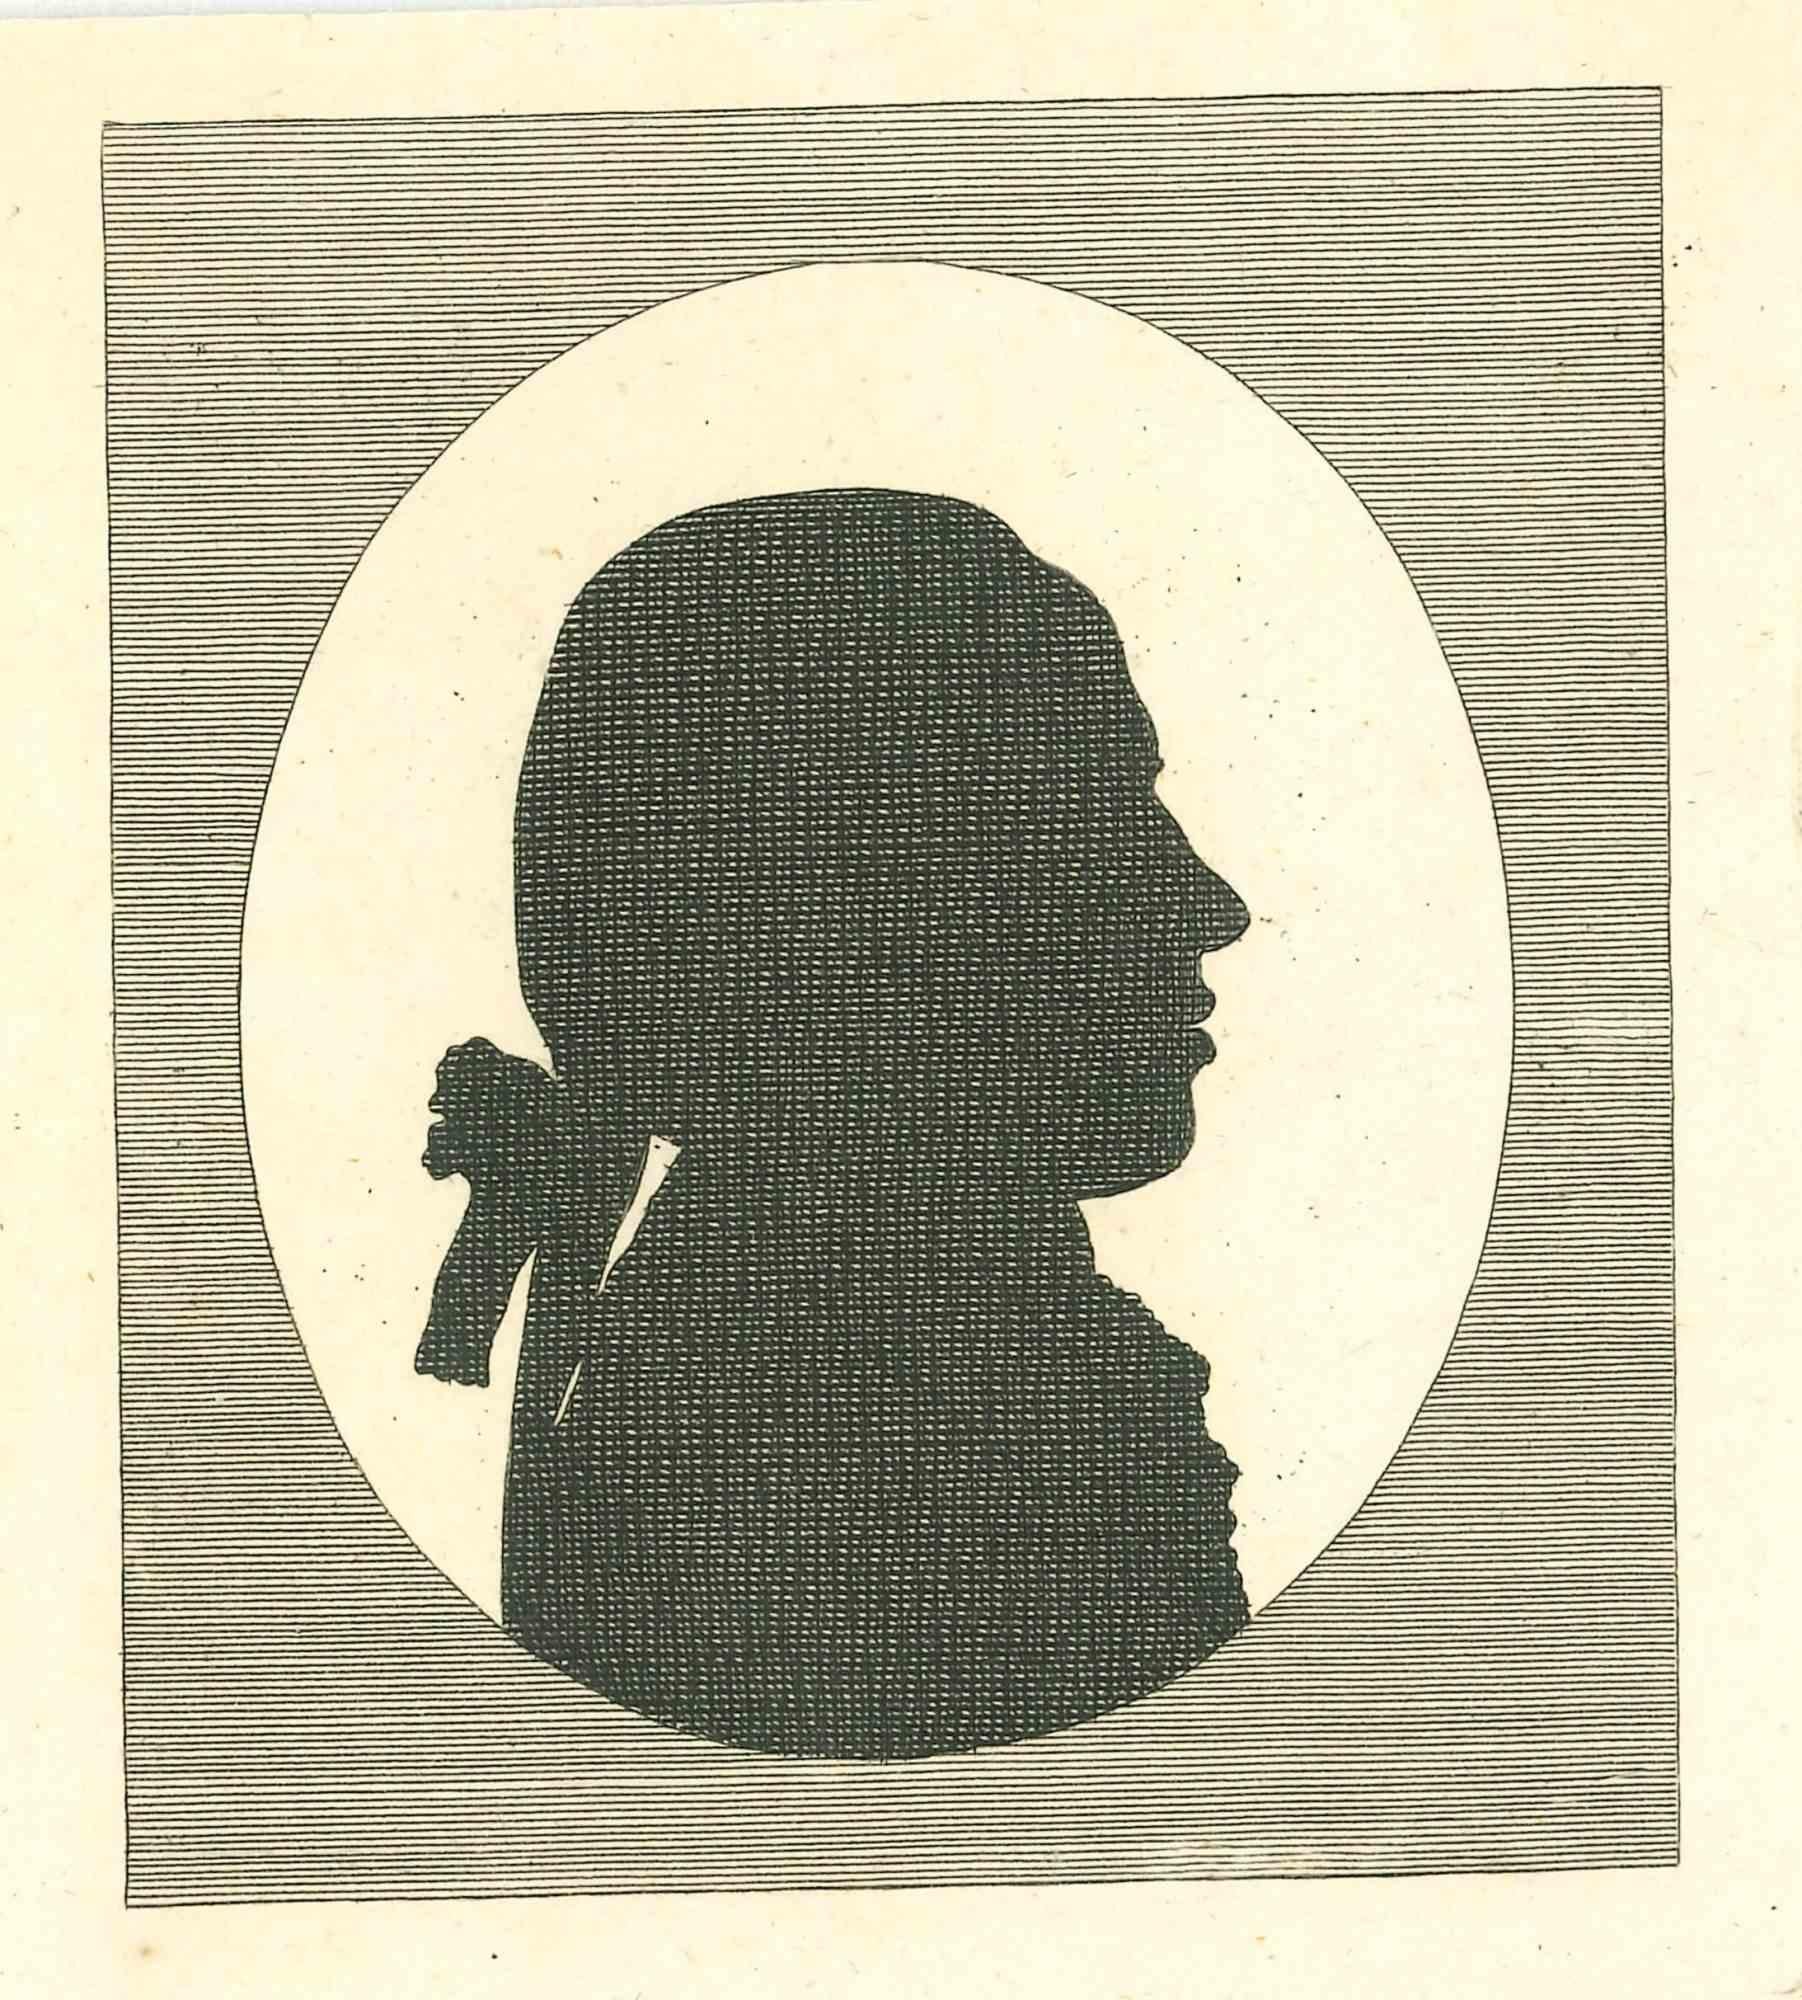 The Silhouette Profile - The Physiognomy is an original etching artwork realized by Thomas Holloway for Johann Caspar Lavater's "Essays on Physiognomy, Designed to Promote the Knowledge and the Love of Mankind", London, Bensley, 1810. 

Good